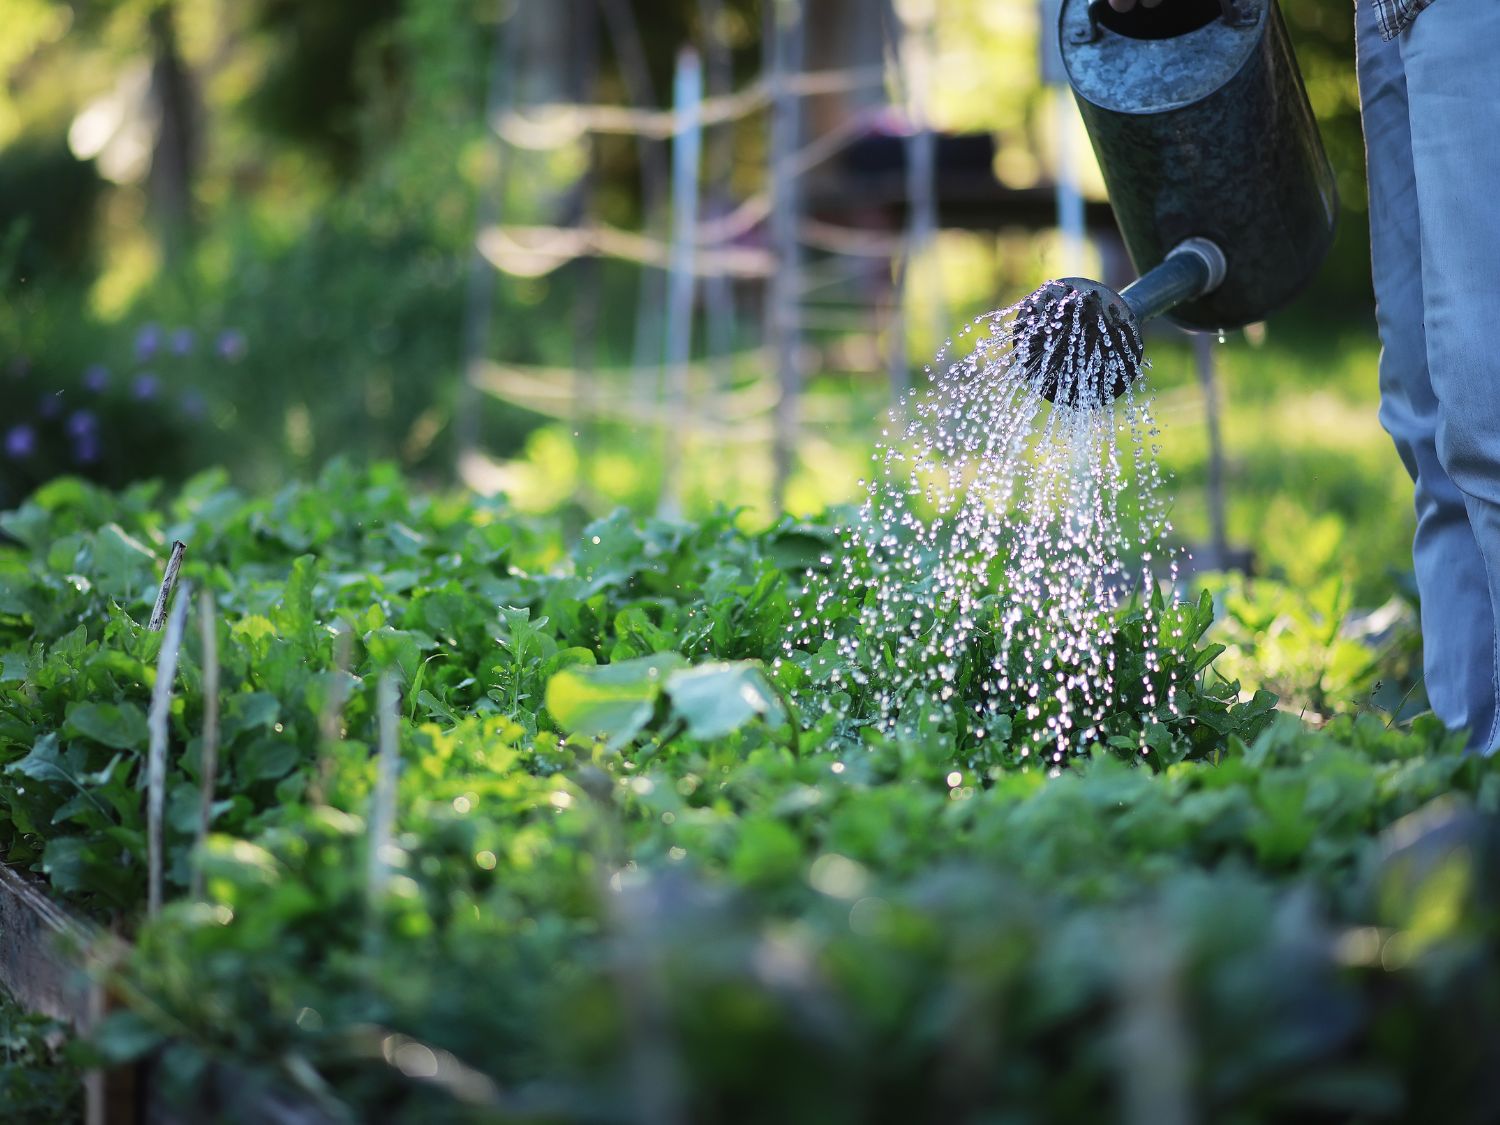 A photo of someone hand watering their garden using a pail